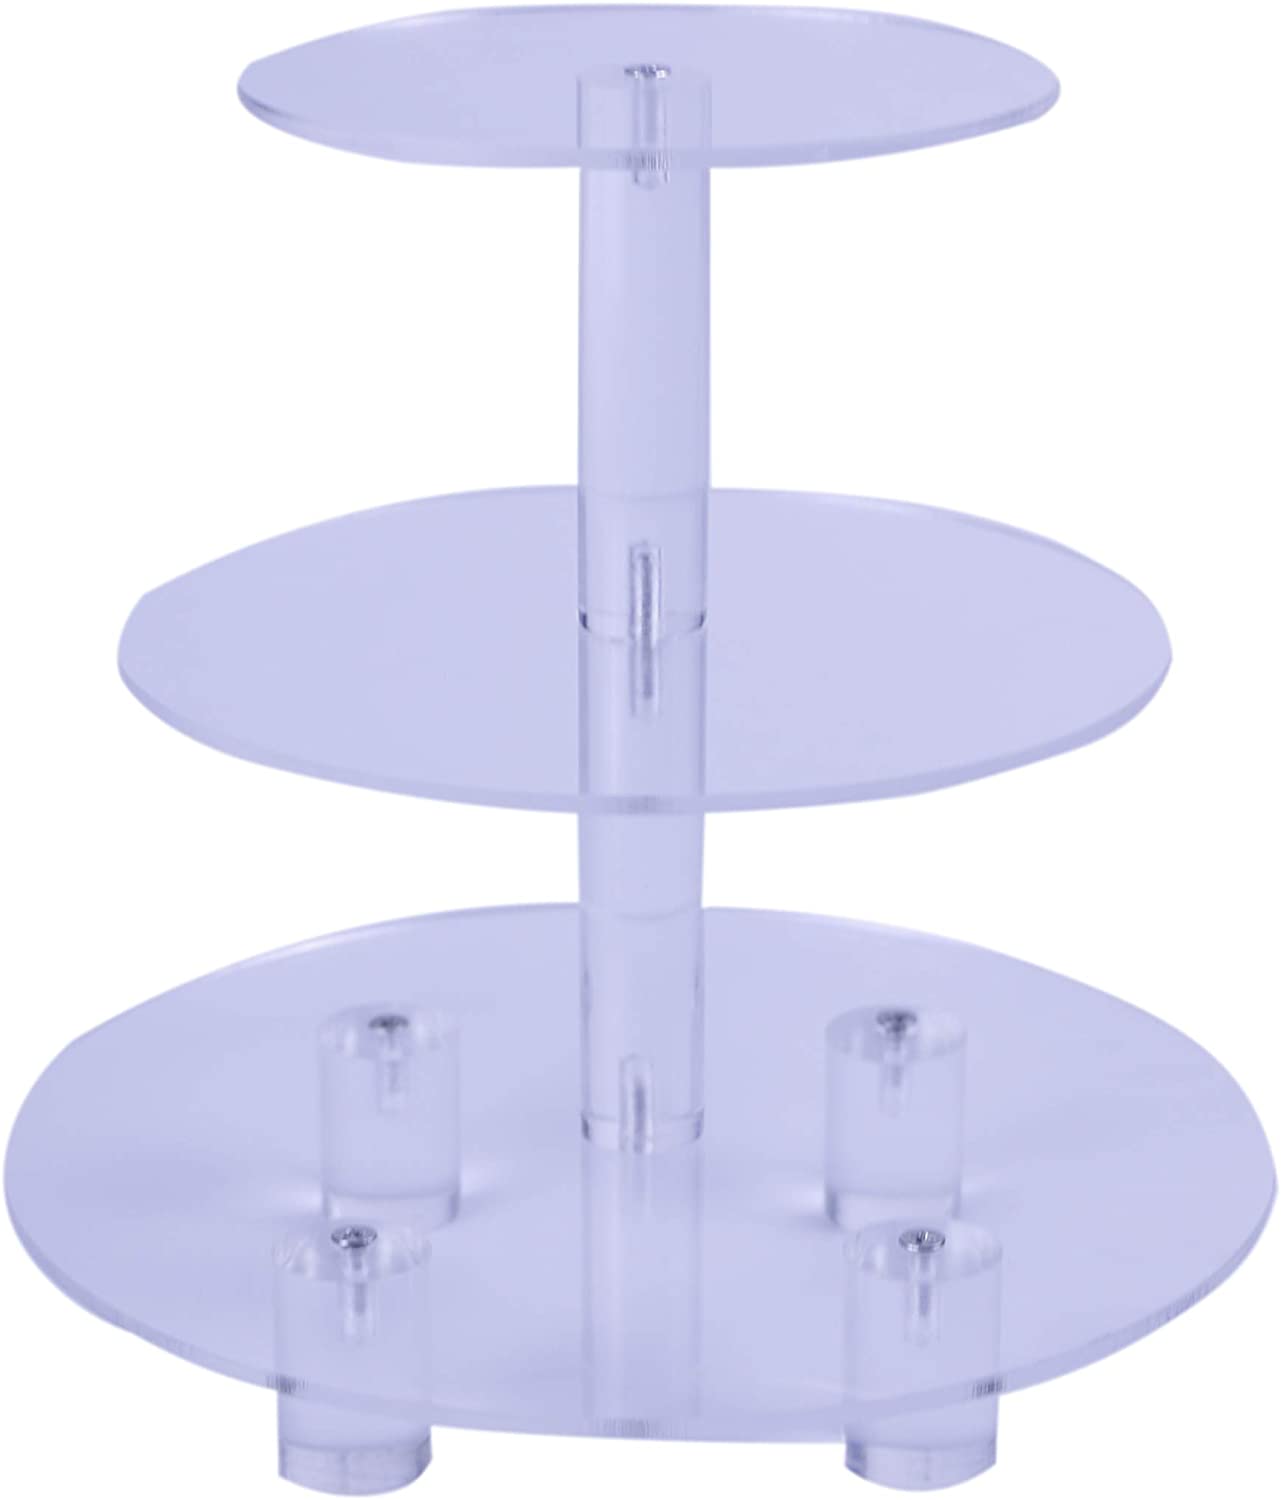 HMROVOOM Acrylic Cupcake Stand 3 Tier Round with base